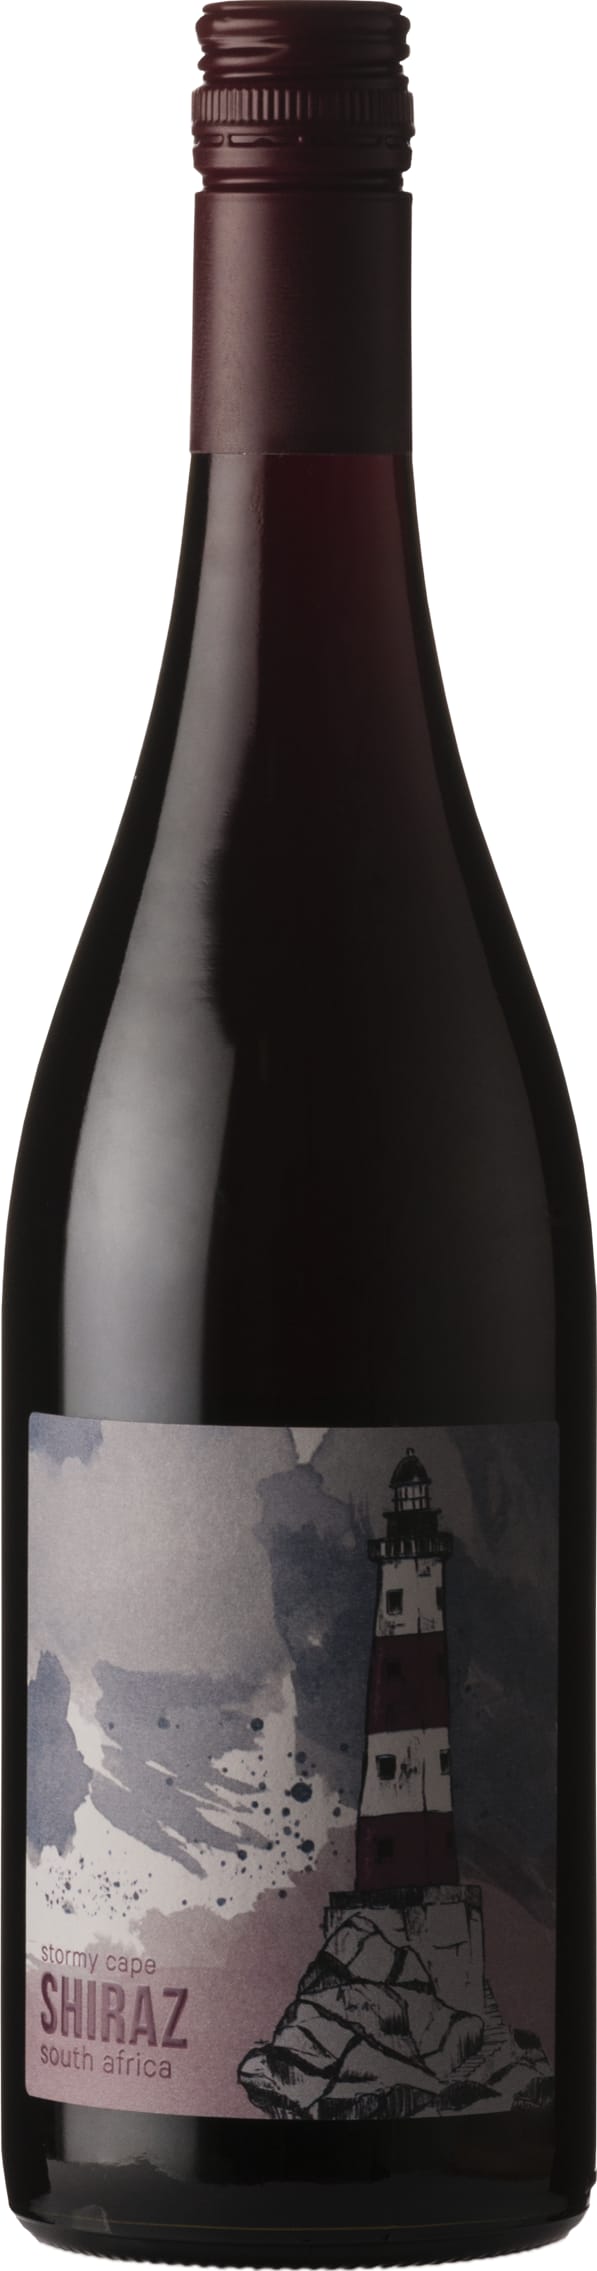 Stormy Cape Shiraz 2022 75cl - Buy Stormy Cape Wines from GREAT WINES DIRECT wine shop